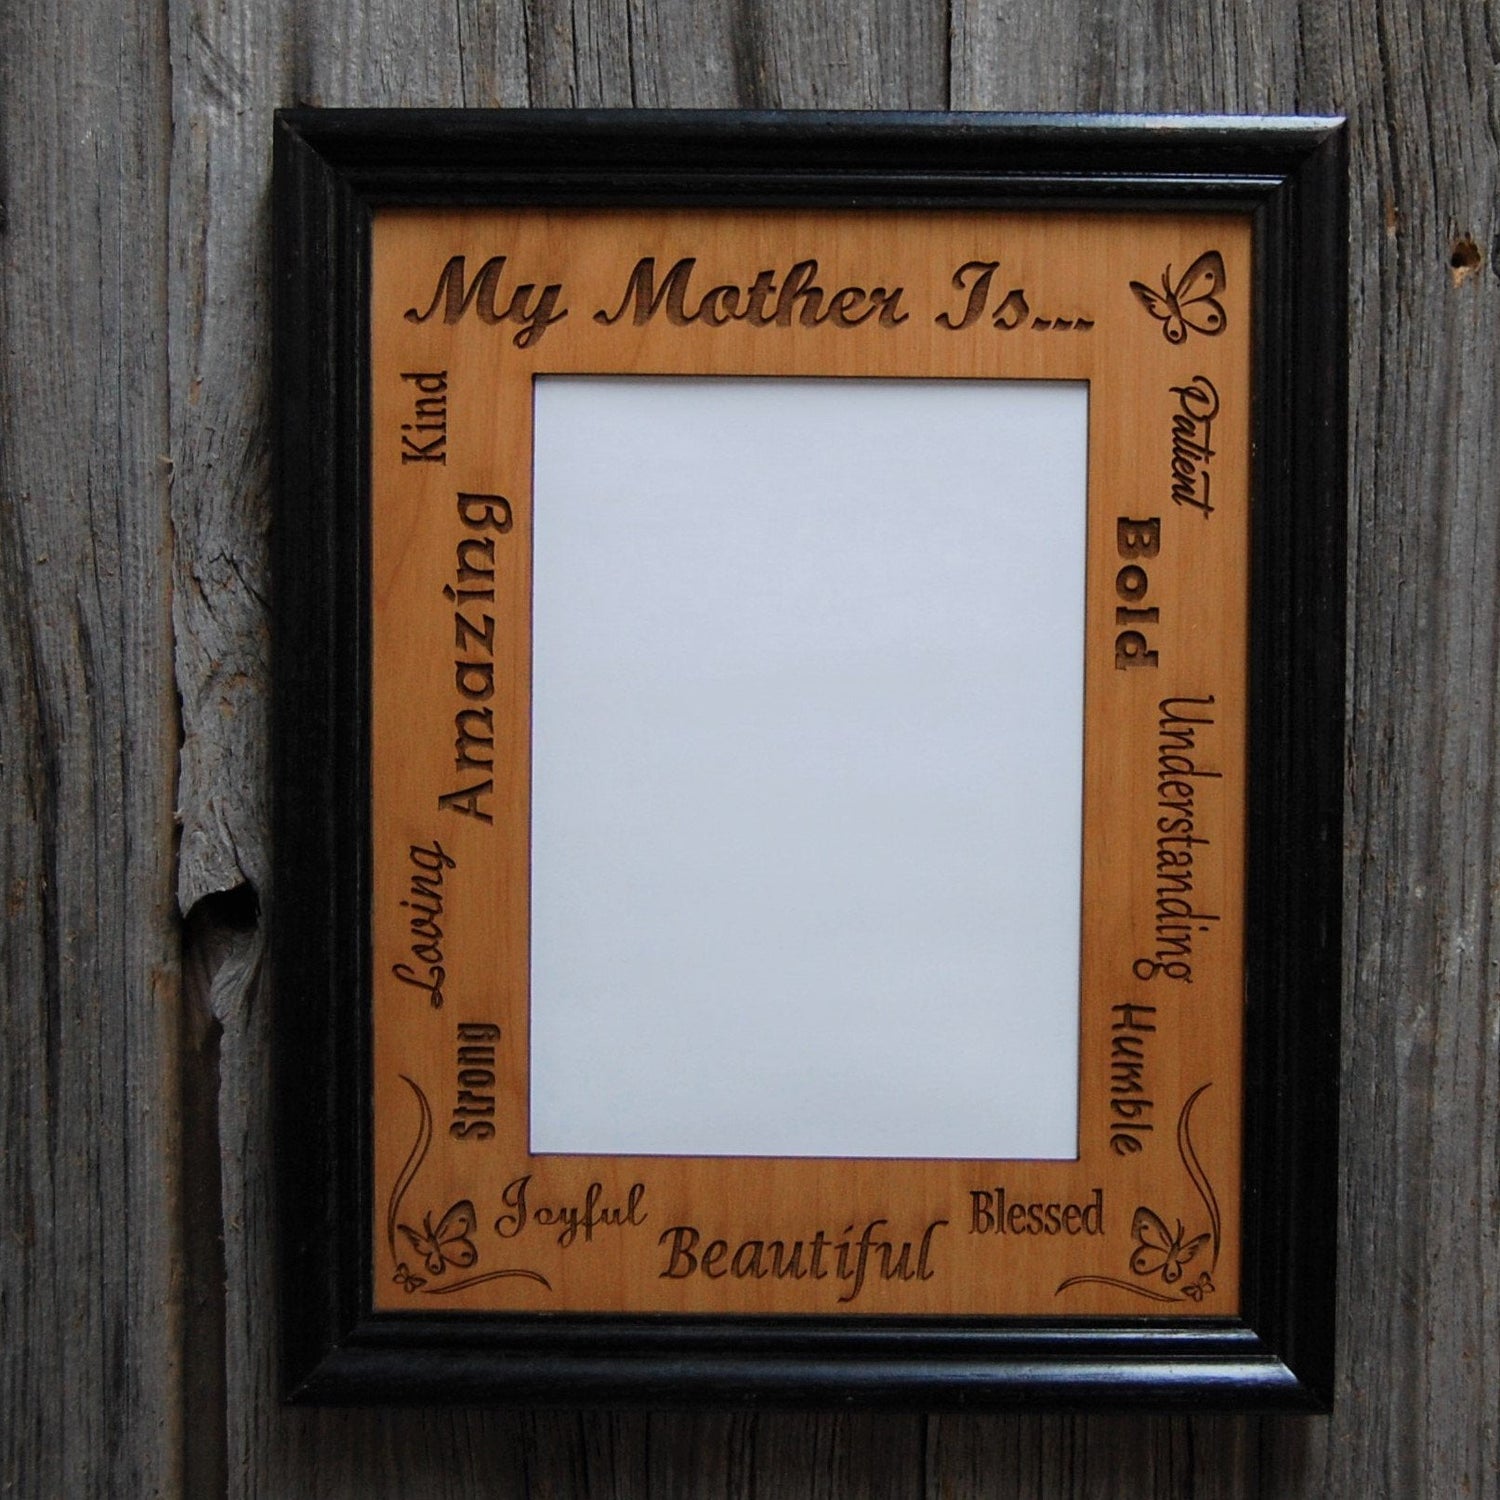 My Mother Is... Picture Frame - 8x10 Frame Hold 5x7 Photo - My Mother Is... Picture Frame, Picture Frame, home decor, laser engraved - Legacy Images - Legacy Images - Picture Frames